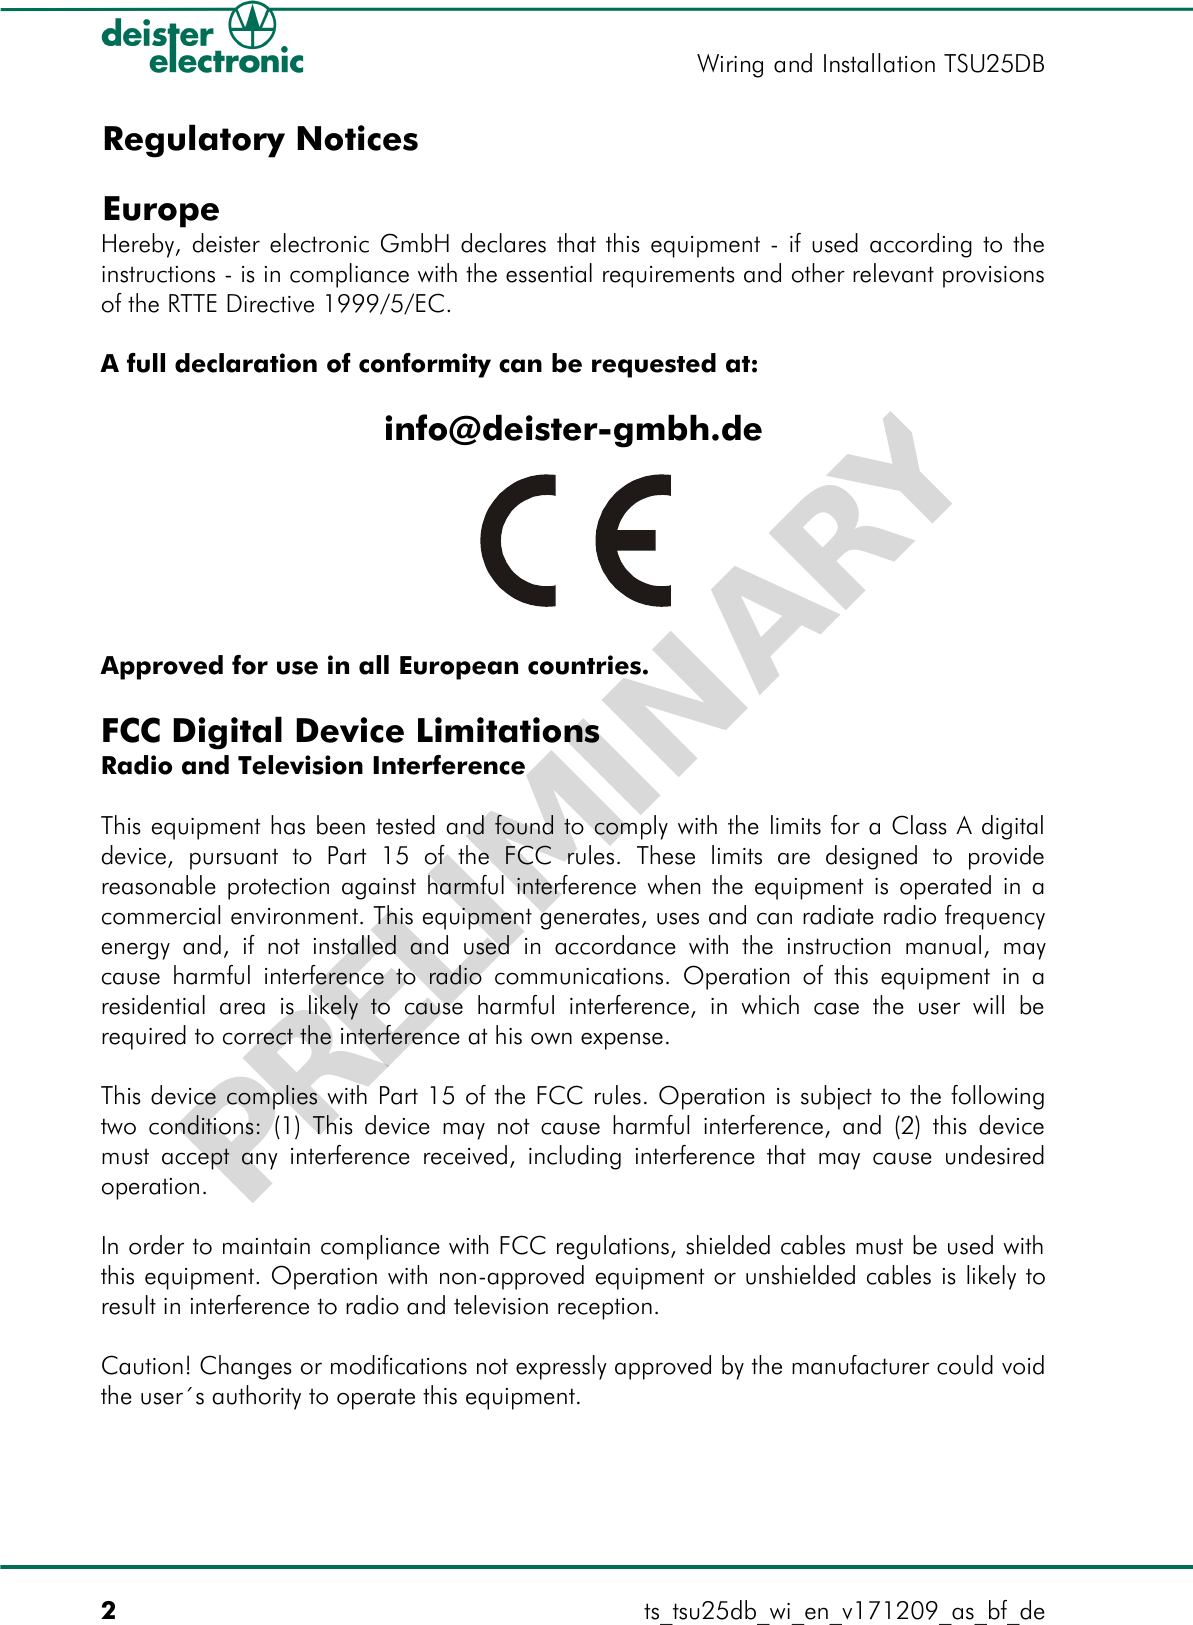 DBRegulatory Notices EuropeHereby, deister electronic GmbH declares that this equipment - if used according to the instructions - is in compliance with the essential requirements and other relevant provisions of the RTTE Directive 1999/5/EC.A full declaration of conformity can be requested at:info@deister-gmbh.deApproved for use in all European countries.FCC Digital Device LimitationsRadio and Television InterferenceThis equipment has been tested and found to comply with the limits for a Class A digital device,   pursuant   to   Part   15  of  the   FCC   rules.   These   limits   are   designed   to  provide reasonable protection against harmful interference when the equipment is operated in a commercial environment. This equipment generates, uses and can radiate radio frequency energy and, if not installed and used in accordance with the instruction manual, may cause harmful interference to radio communications. Operation of this equipment in a residential area is likely to  cause  harmful interference, in  which  case the  user  will  be required to correct the interference at his own expense.This device complies with Part 15 of the FCC rules. Operation is subject to the following two conditions: (1) This device may not cause harmful interference, and (2) this device must accept any interference received, including interference that may cause undesired operation.In order to maintain compliance with FCC regulations, shielded cables must be used with this equipment. Operation with non-approved equipment or unshielded cables is likely to result in interference to radio and television reception.Caution! Changes or modifications not expressly approved by the manufacturer could void the user´s authority to operate this equipment.2ts_tsu25db_wi_en_v171209_as_bf_deWiring and Installation TSU25DBPRELIMINARY